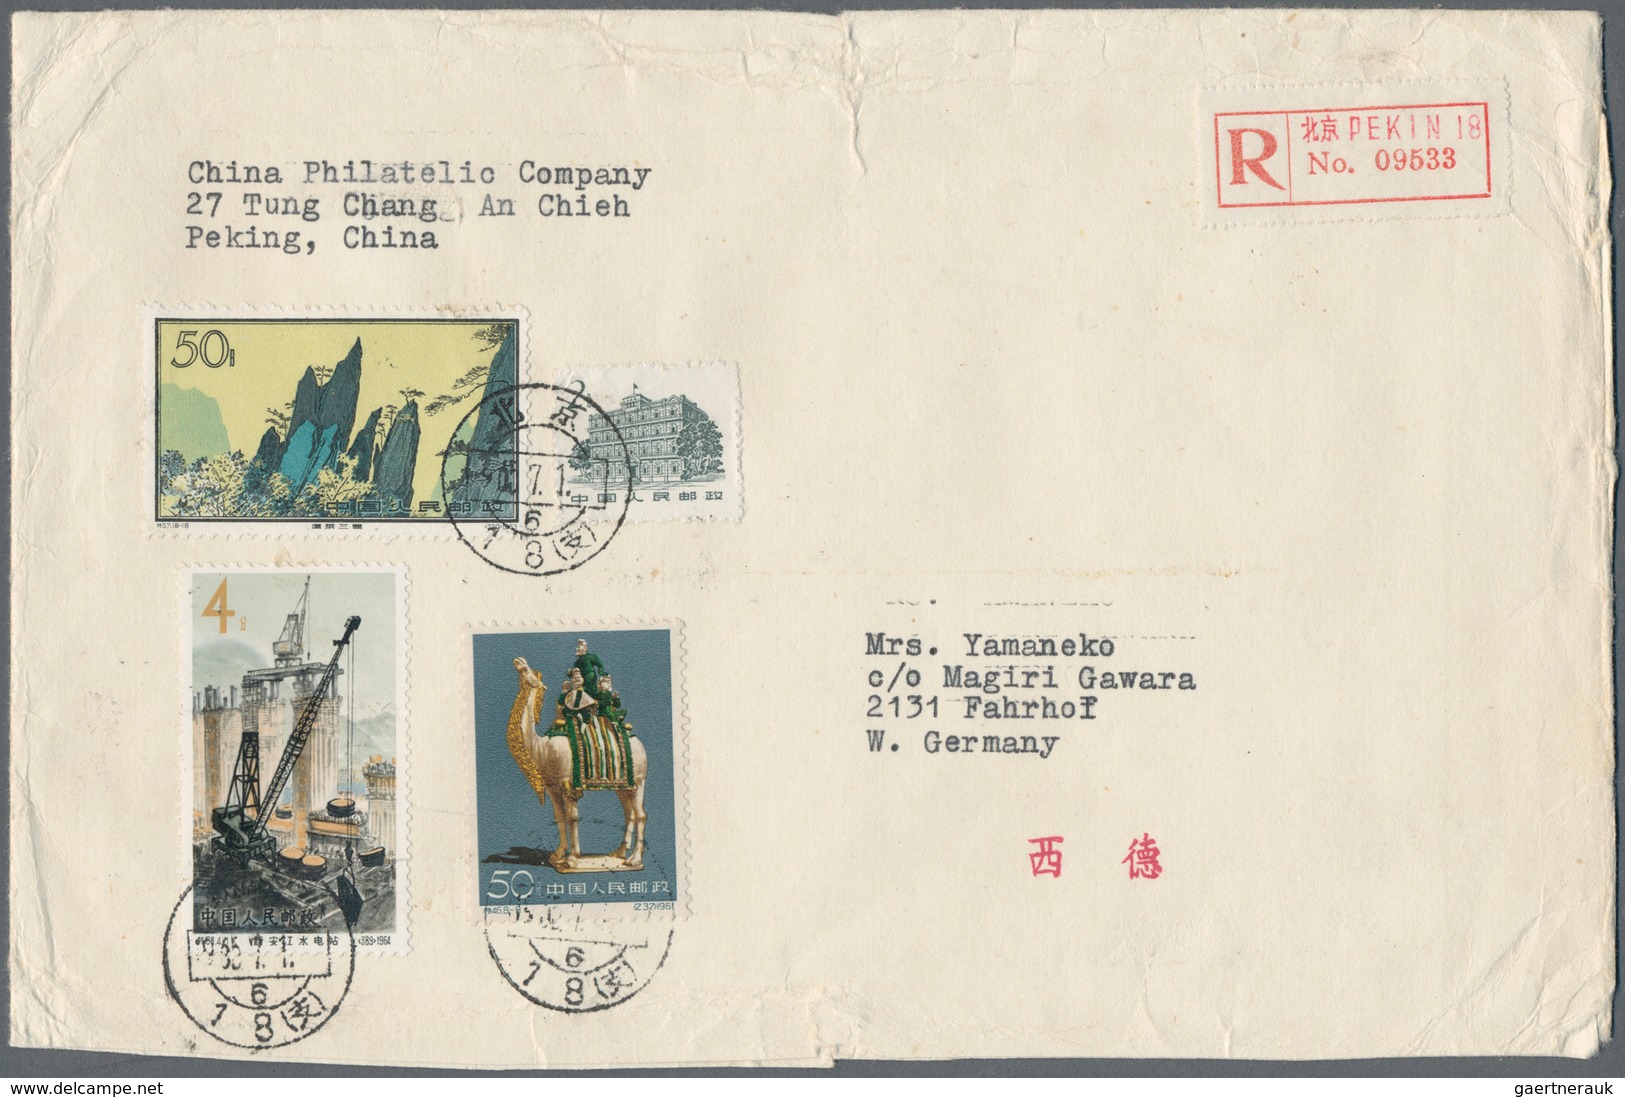 China - Volksrepublik: 1960s/70s, covers (21) or ppc (2) used foreign inc. peonies, Huangshan, chrys